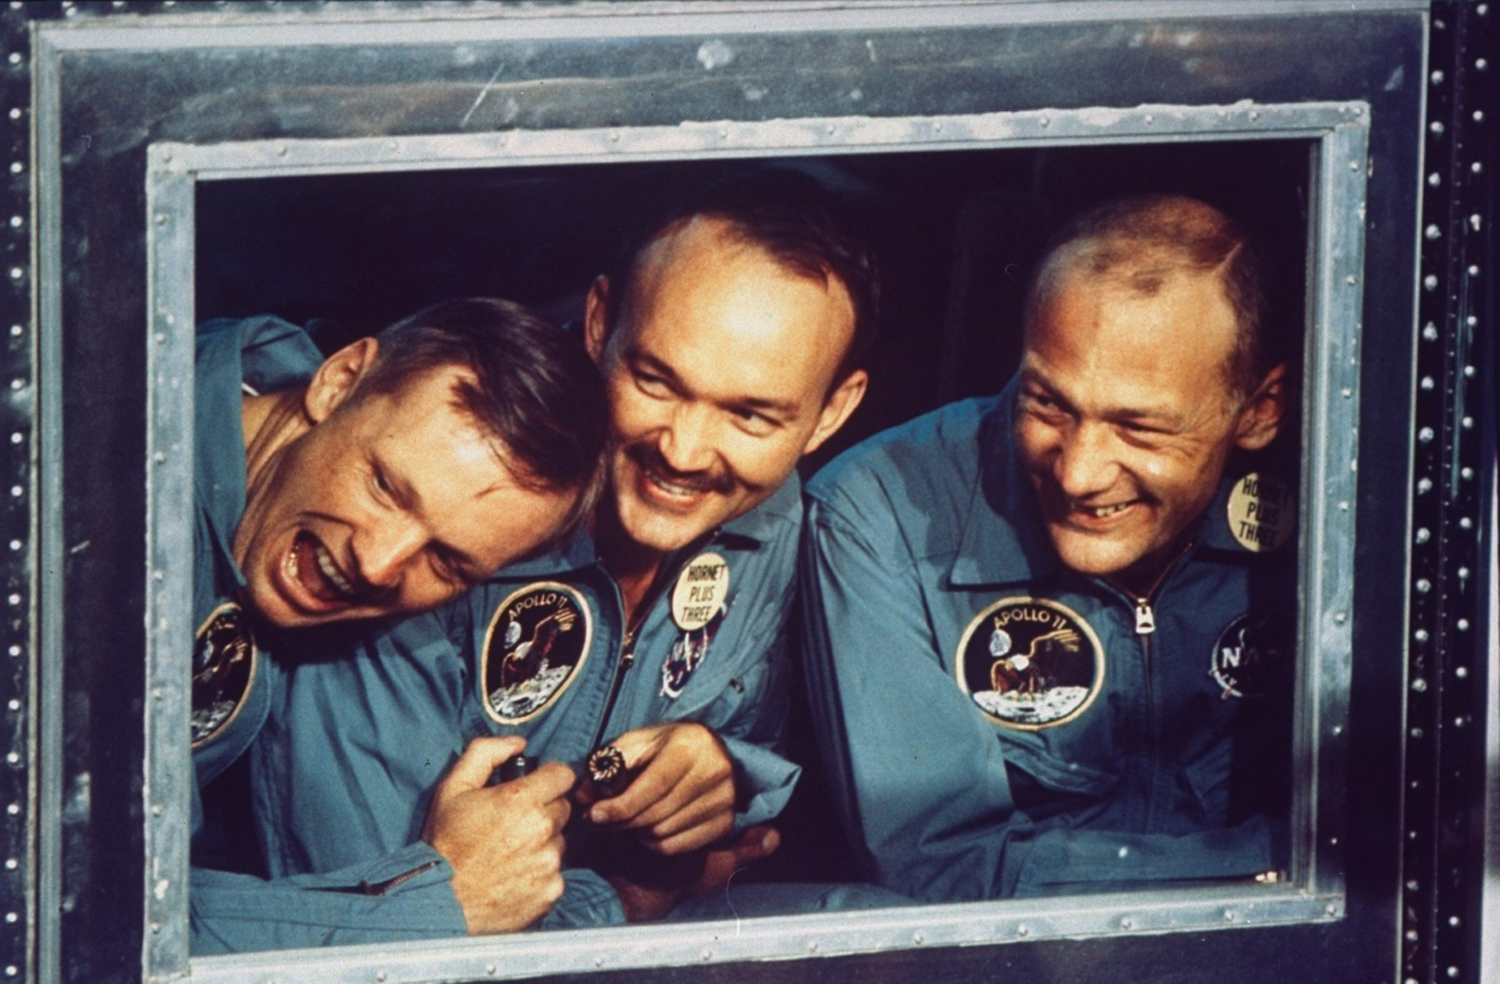 Apollo 11 astronauts Armstrong, Collins and Armstrong peer out the window of their quarantine room aboard the recovery ship Hornet following their return to Earth after historic mission to the moon, July 24, 1969.